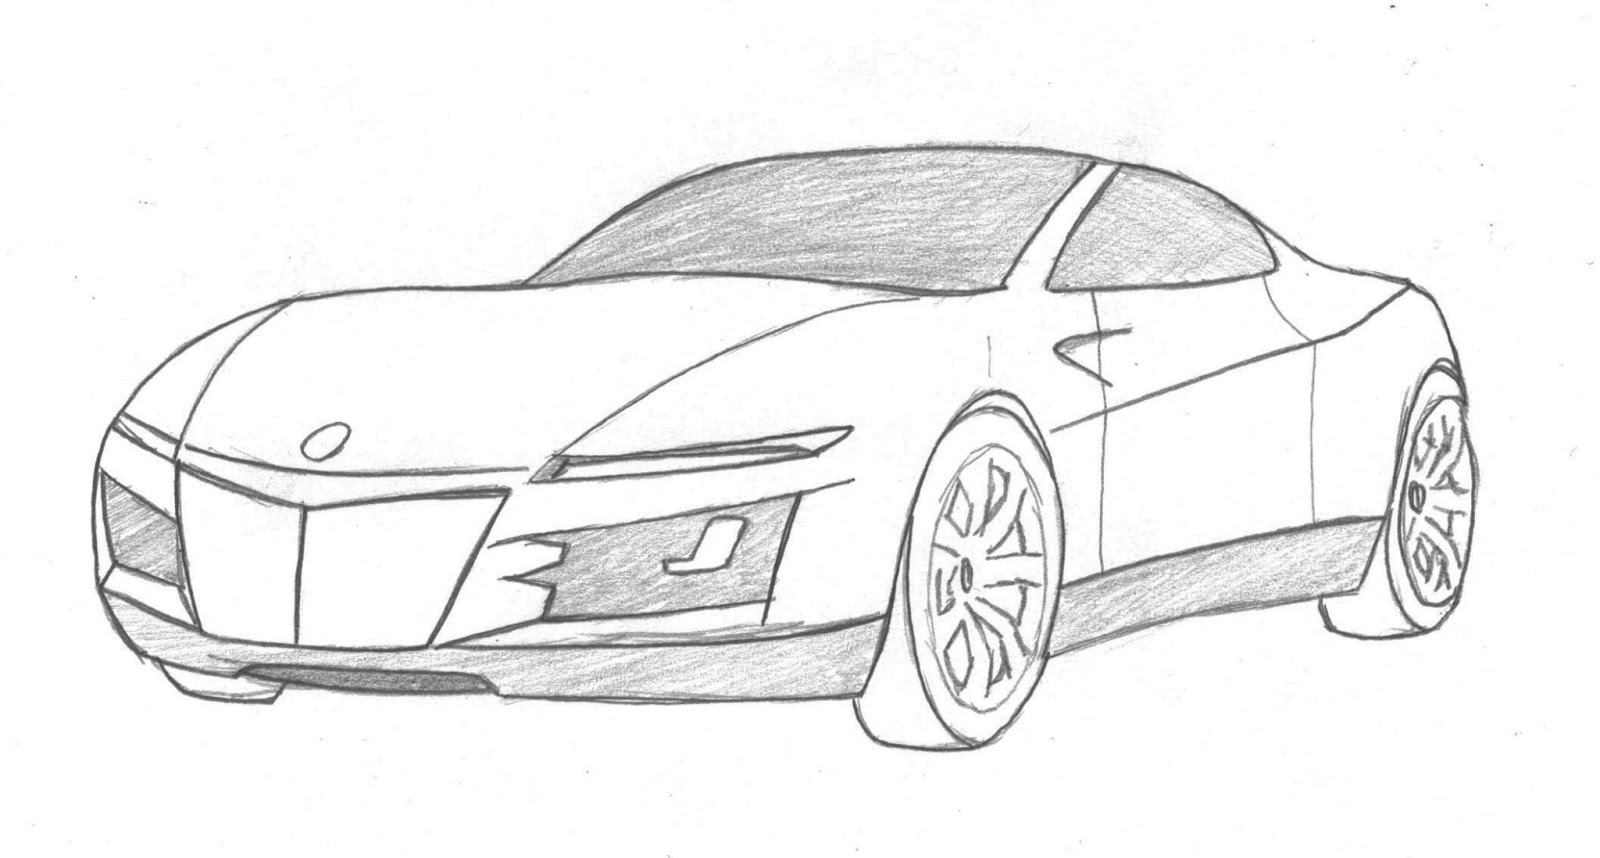 Best How To Draw Car Pencil Sketches with Realistic